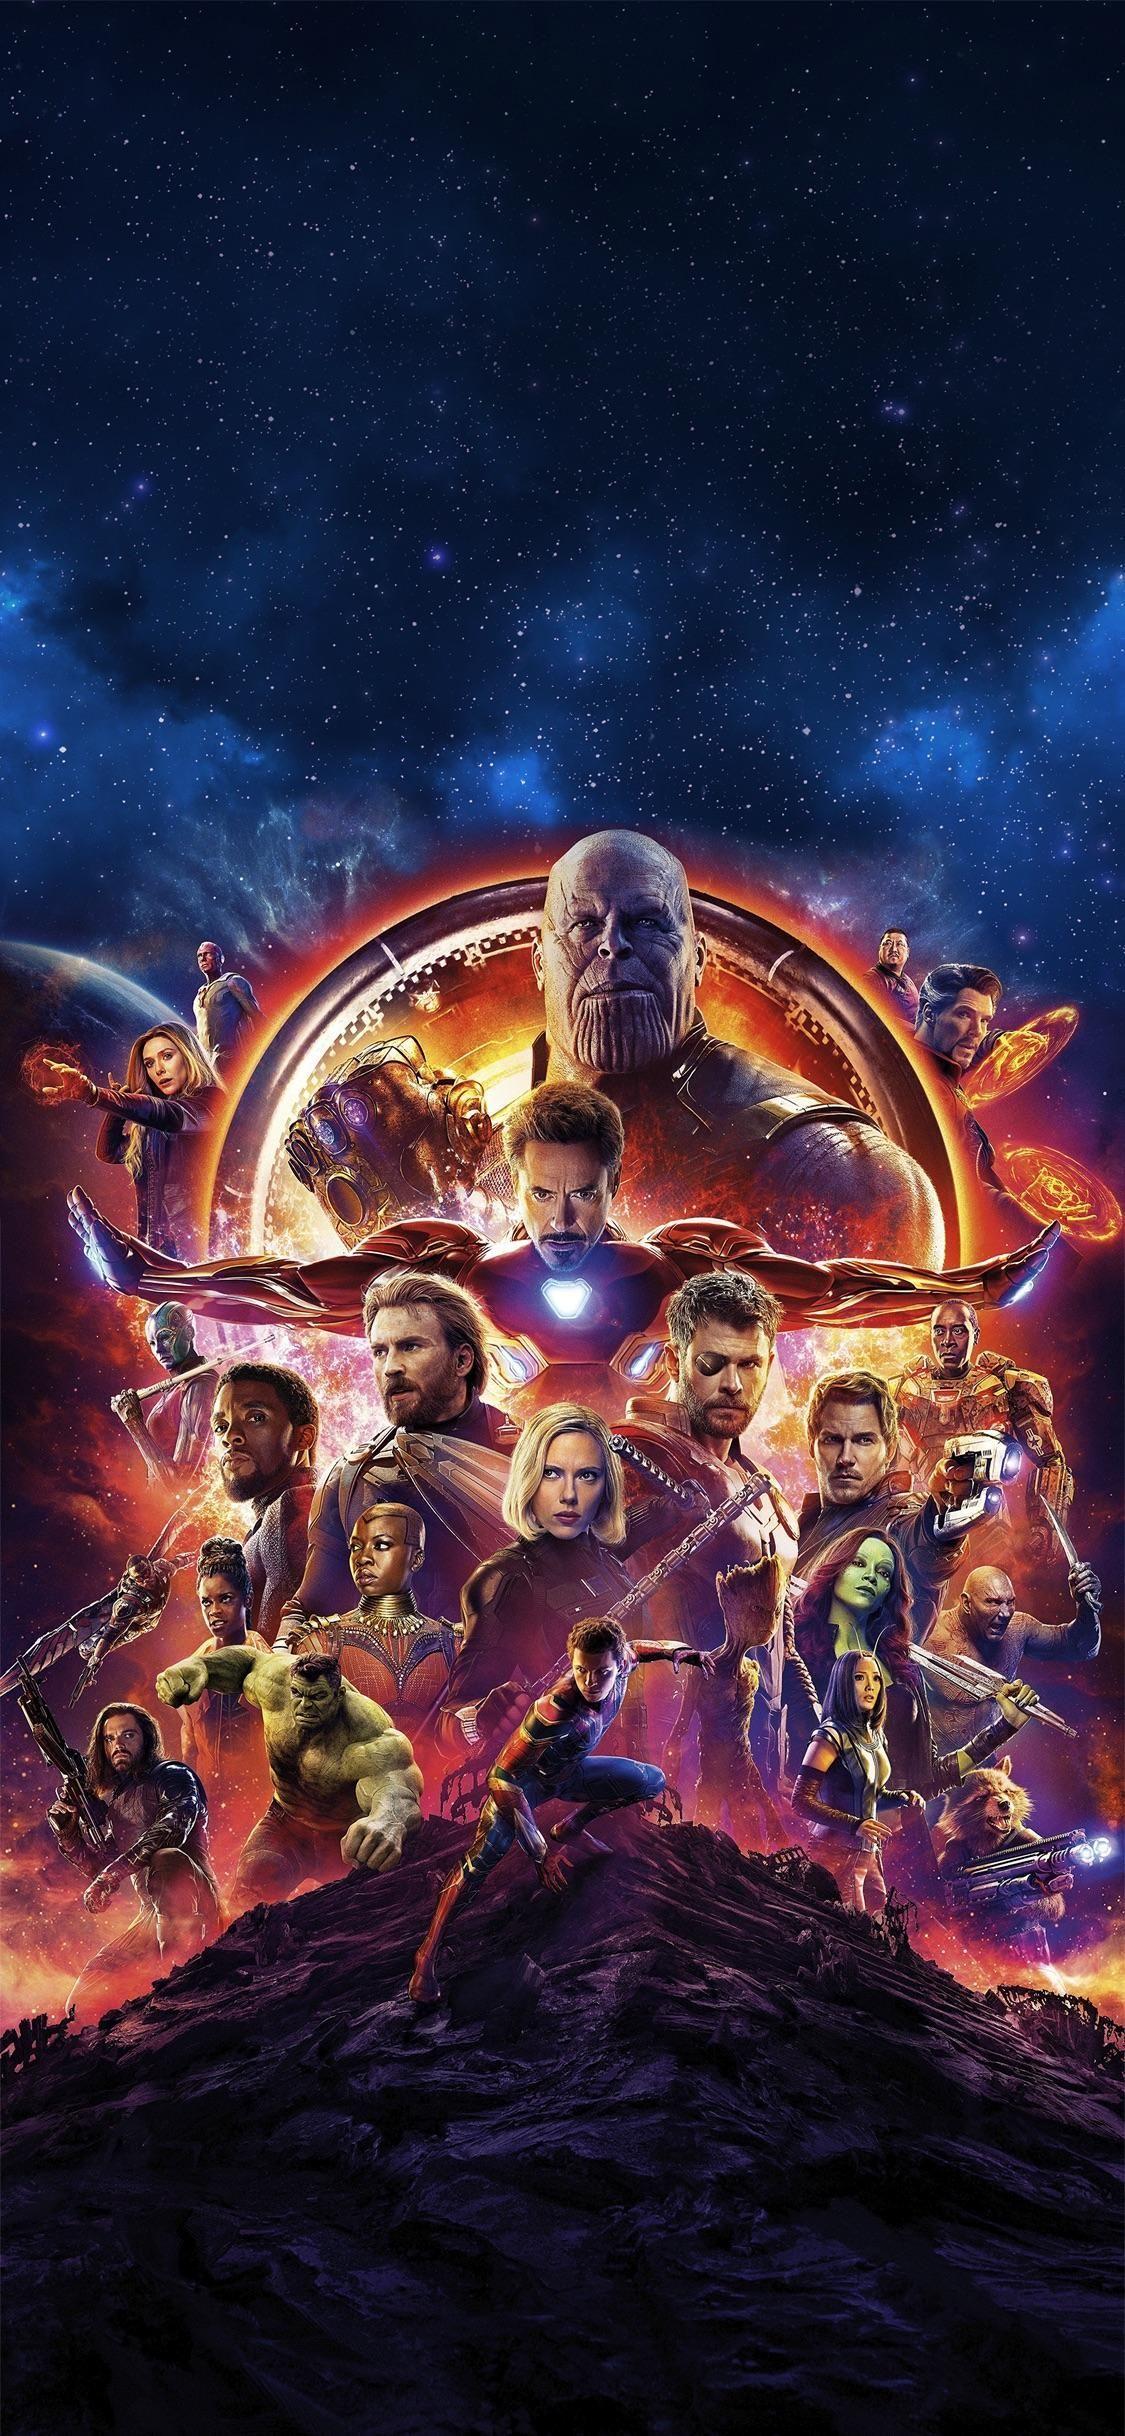 I made an Infinity War wallpaper optimised for iPhone X. My